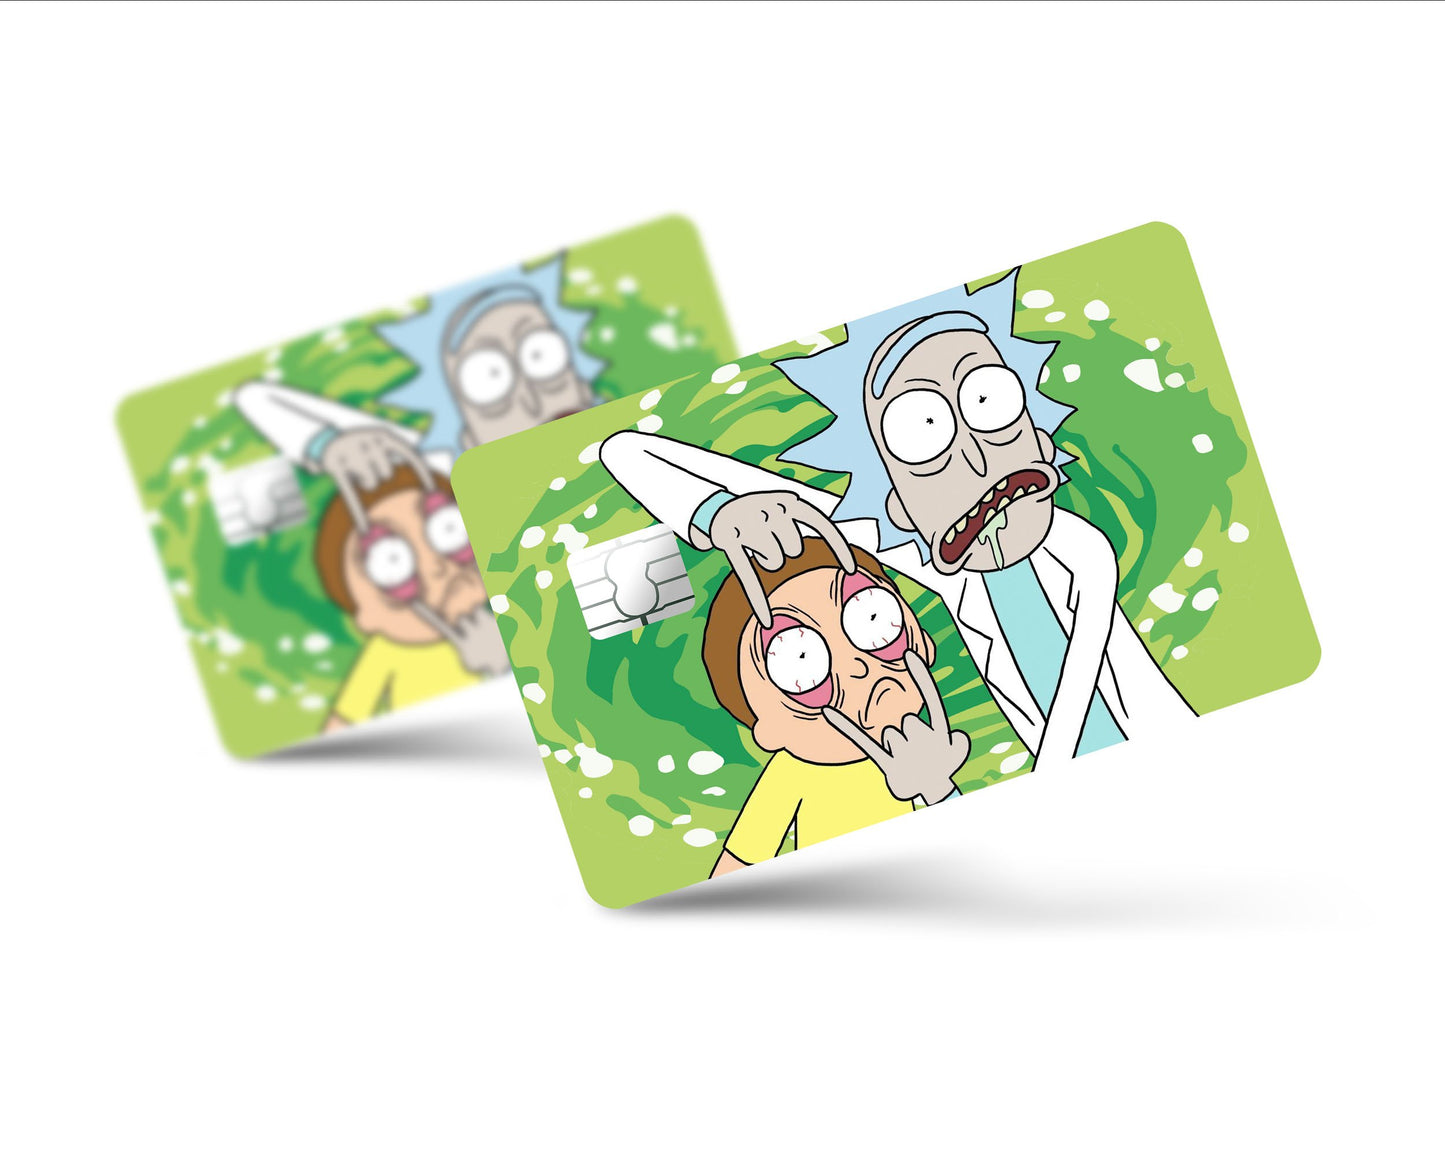 Anime Town Creations Credit Card Rick and Morty Open Your Eyes Morty Full Skins - Pop culture Rick and Morty Skin